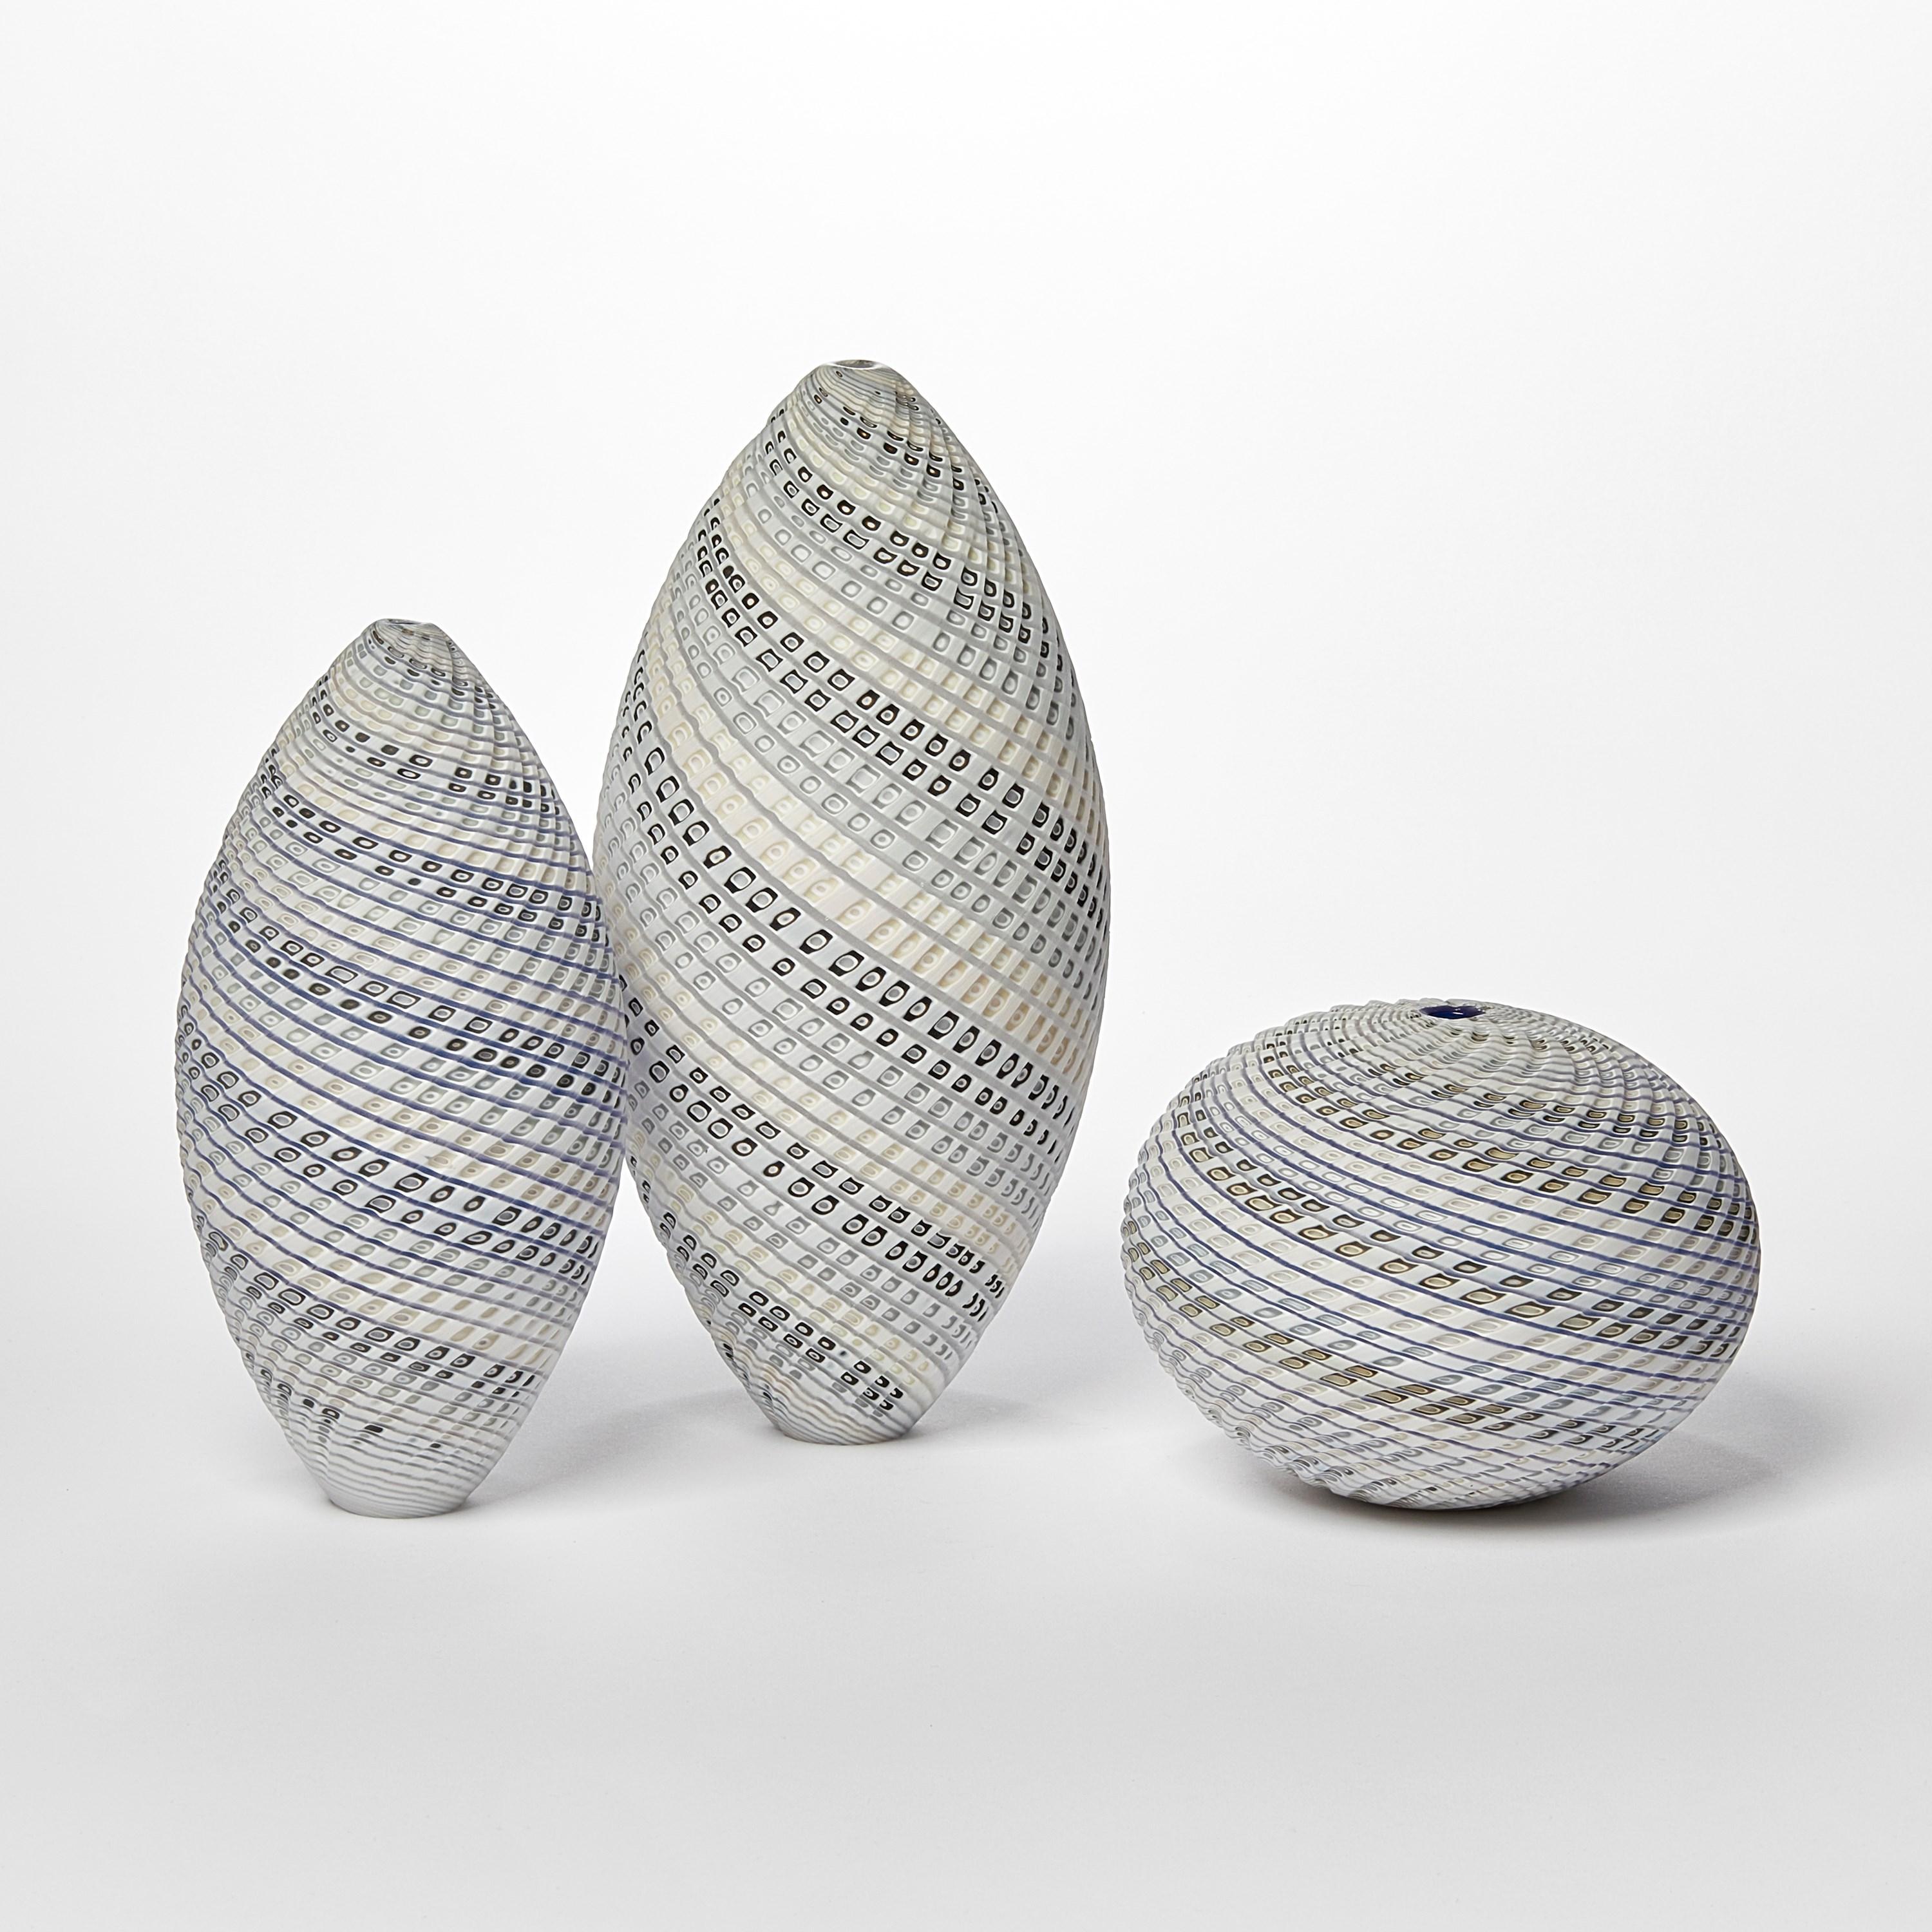 Hand-Crafted Woven Three Tone Blue Ovoid (sm), textured handblown glass vessel by Layne Rowe For Sale